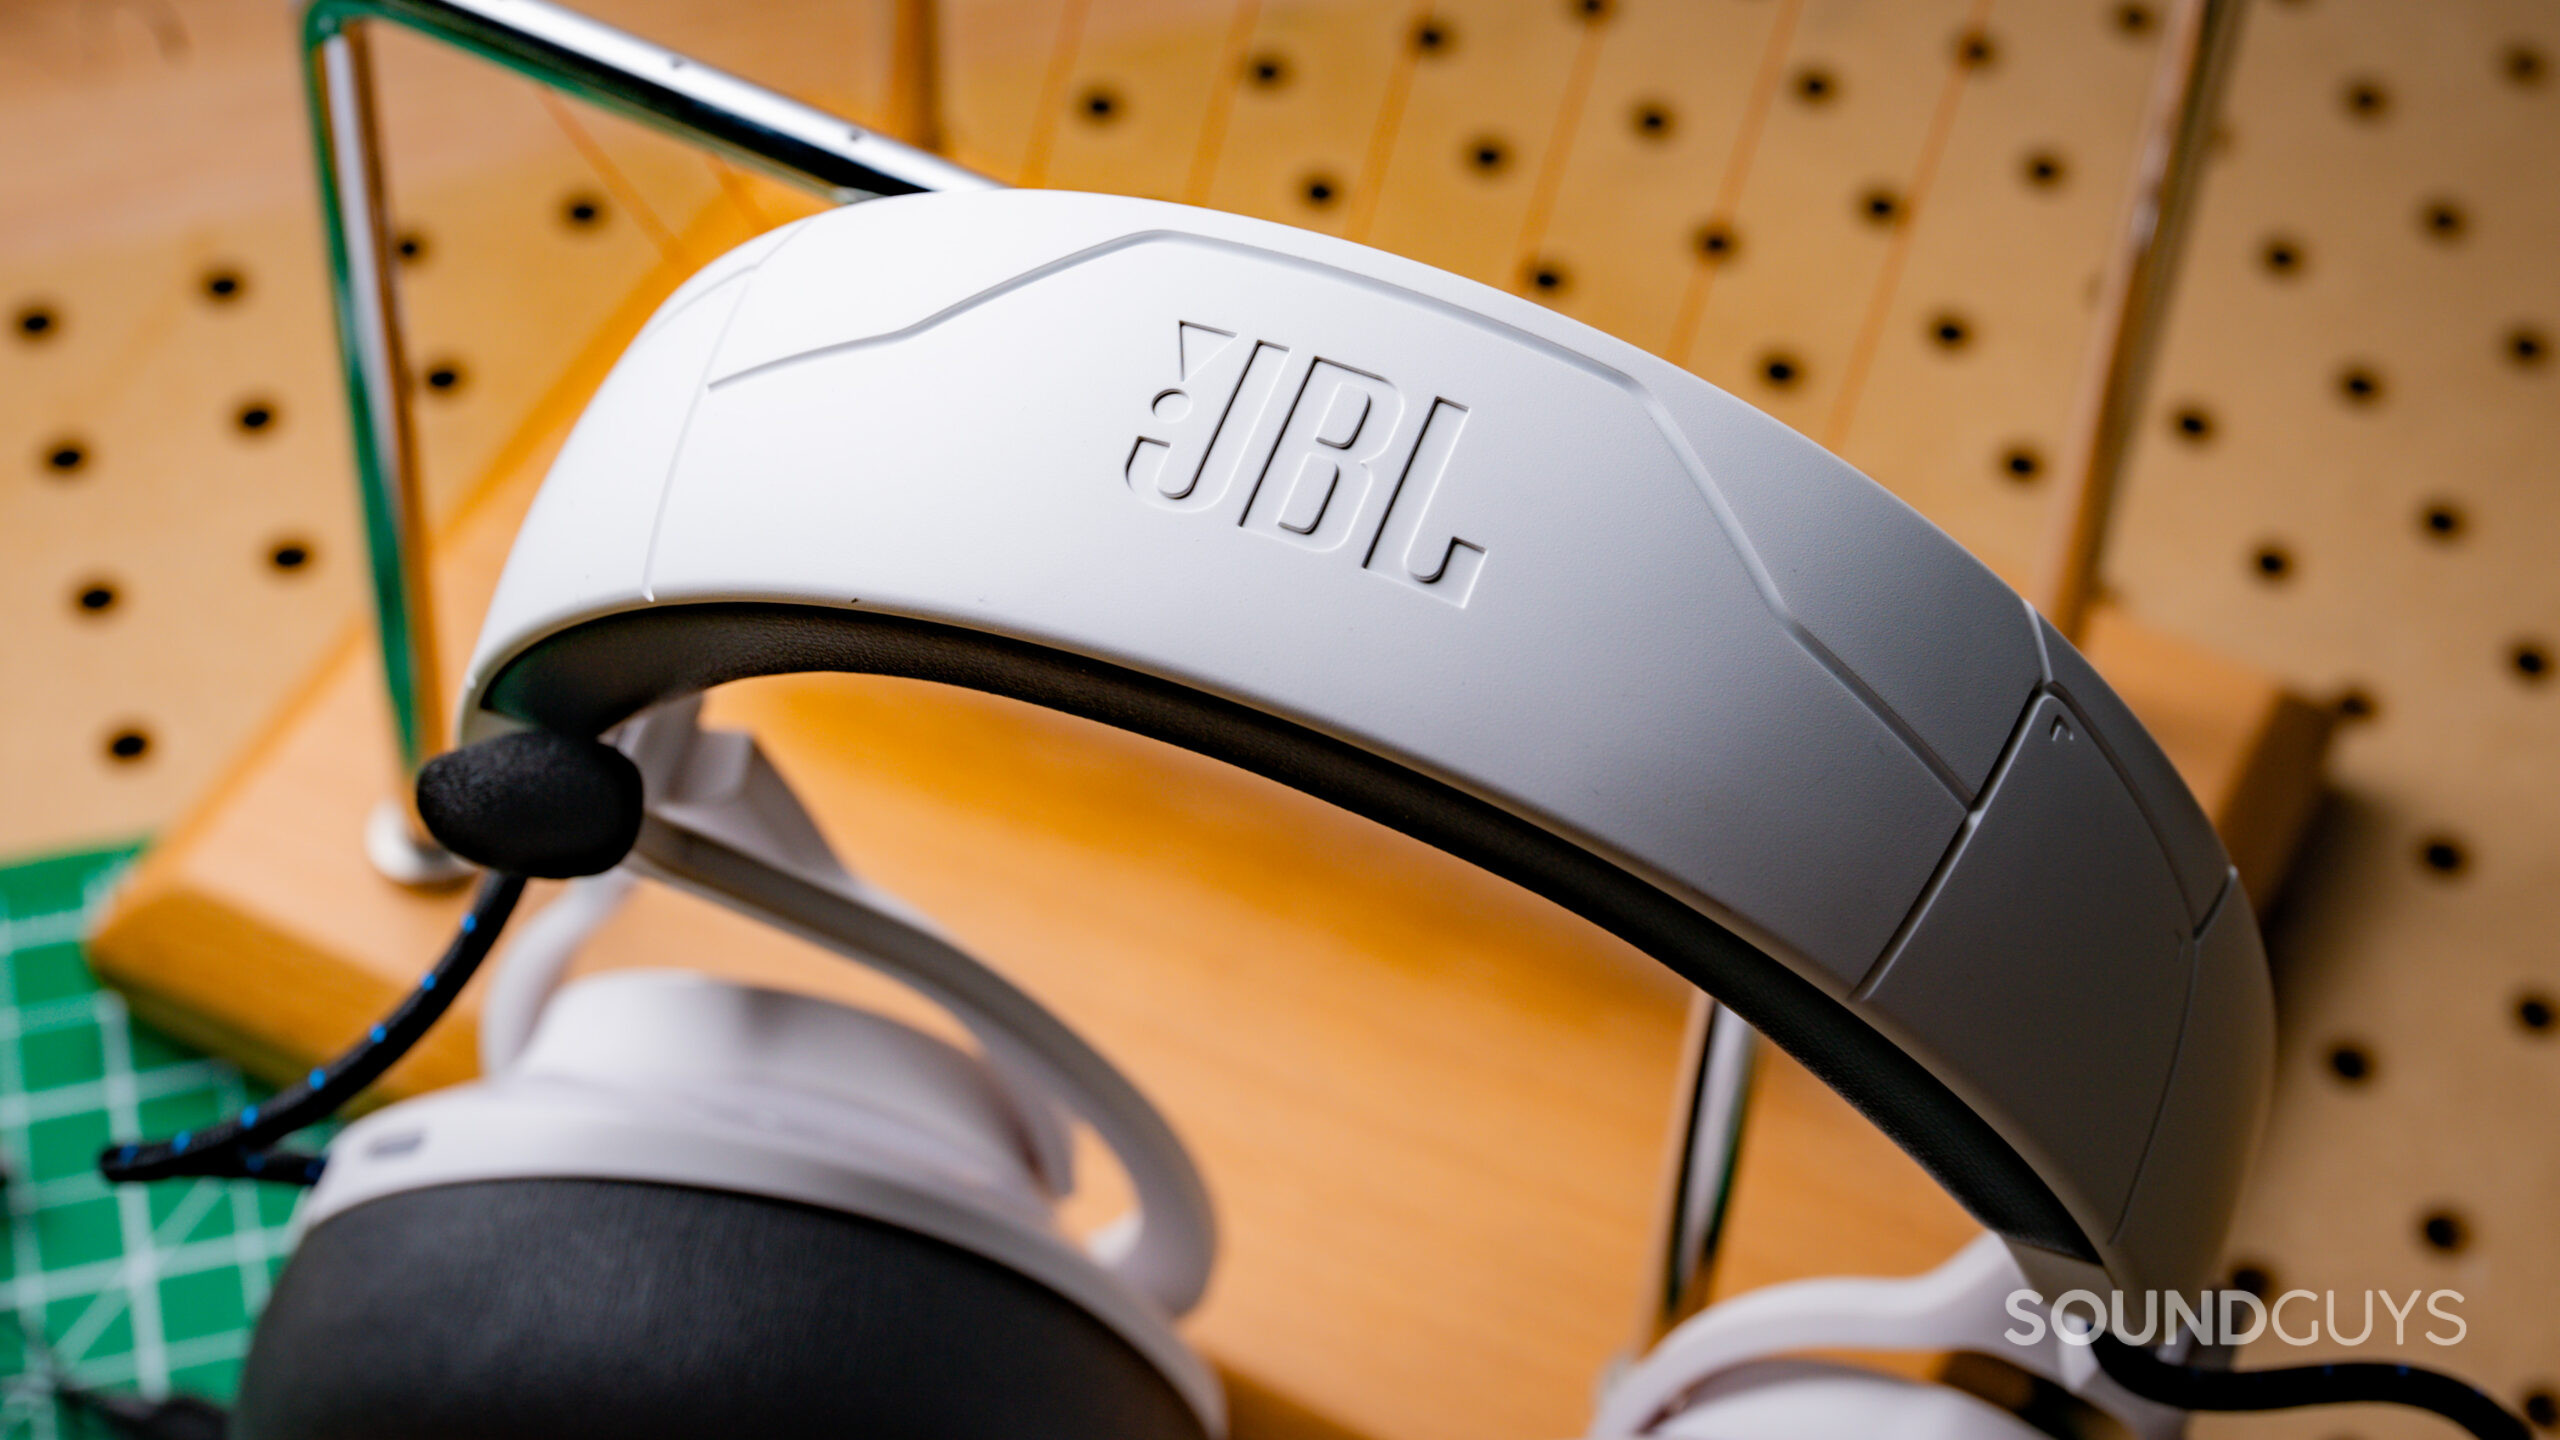 The headband of the JBL Quantum 910P with the JBL logo clearly visible.